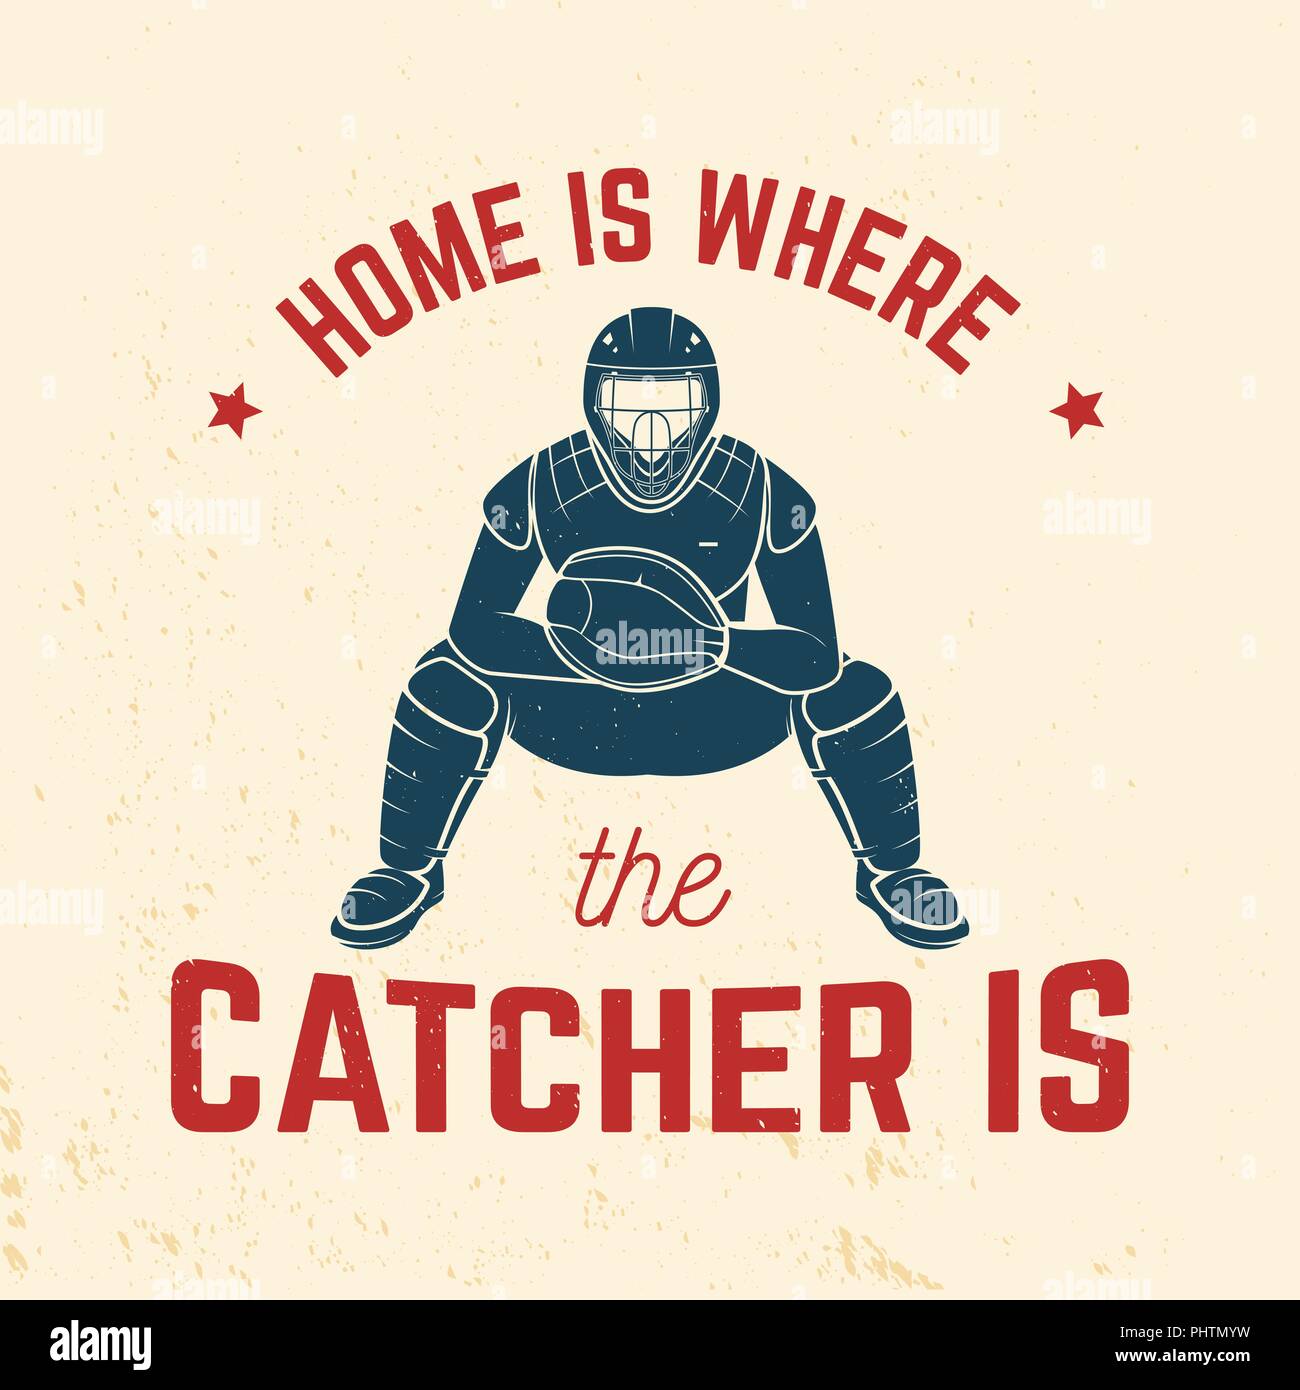 Home is where the catcher is. Vector illustration. Concept for shirt or logo, print, stamp or tee. Vintage typography design with catcher silhouette. Baseball quote. Stock Vector